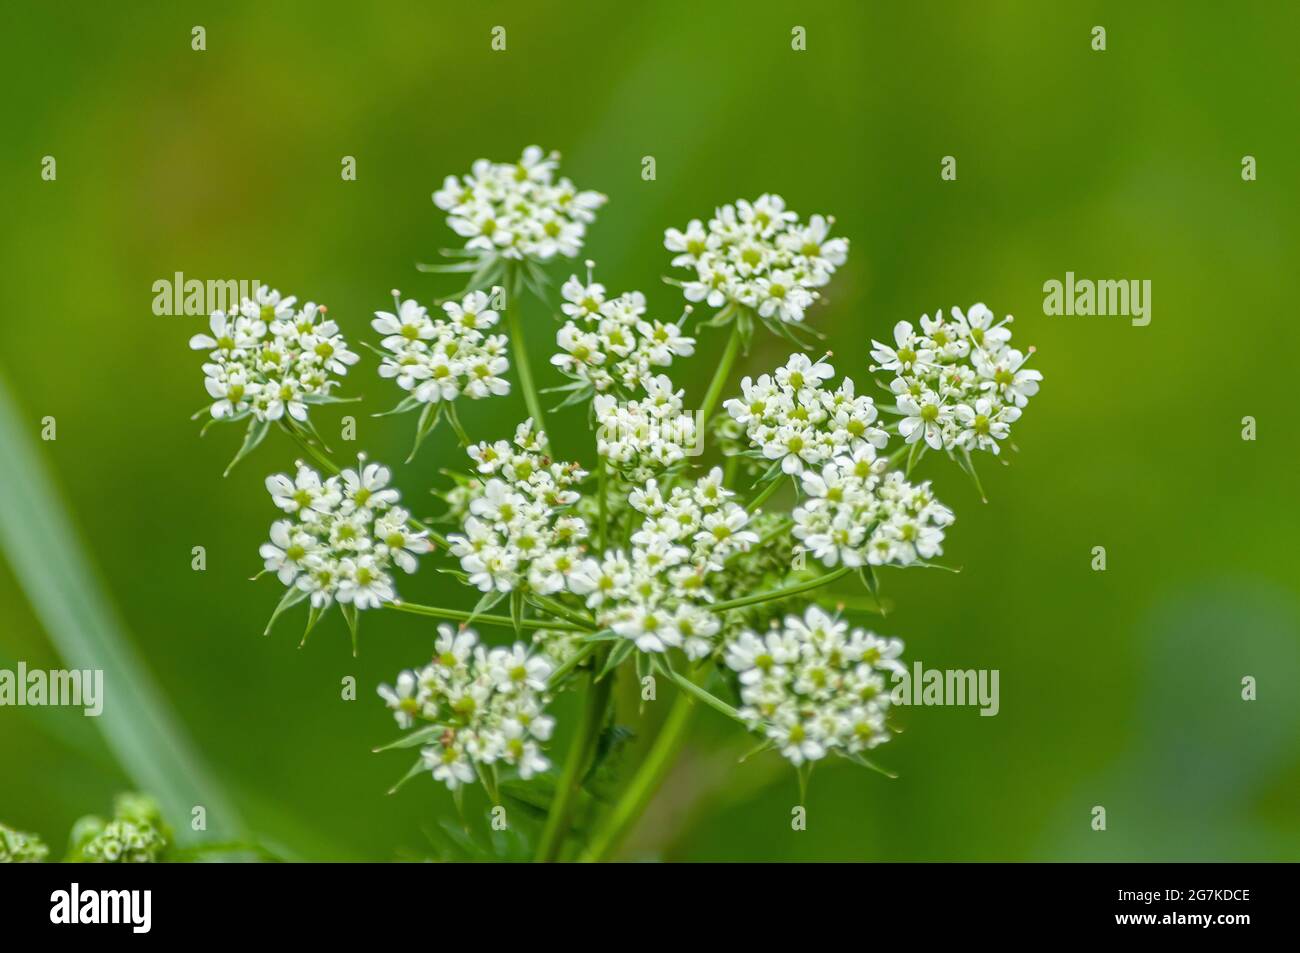 Closeup shot of Chaerophyllum aromaticum flowers with green leaves on a blurred background Stock Photo